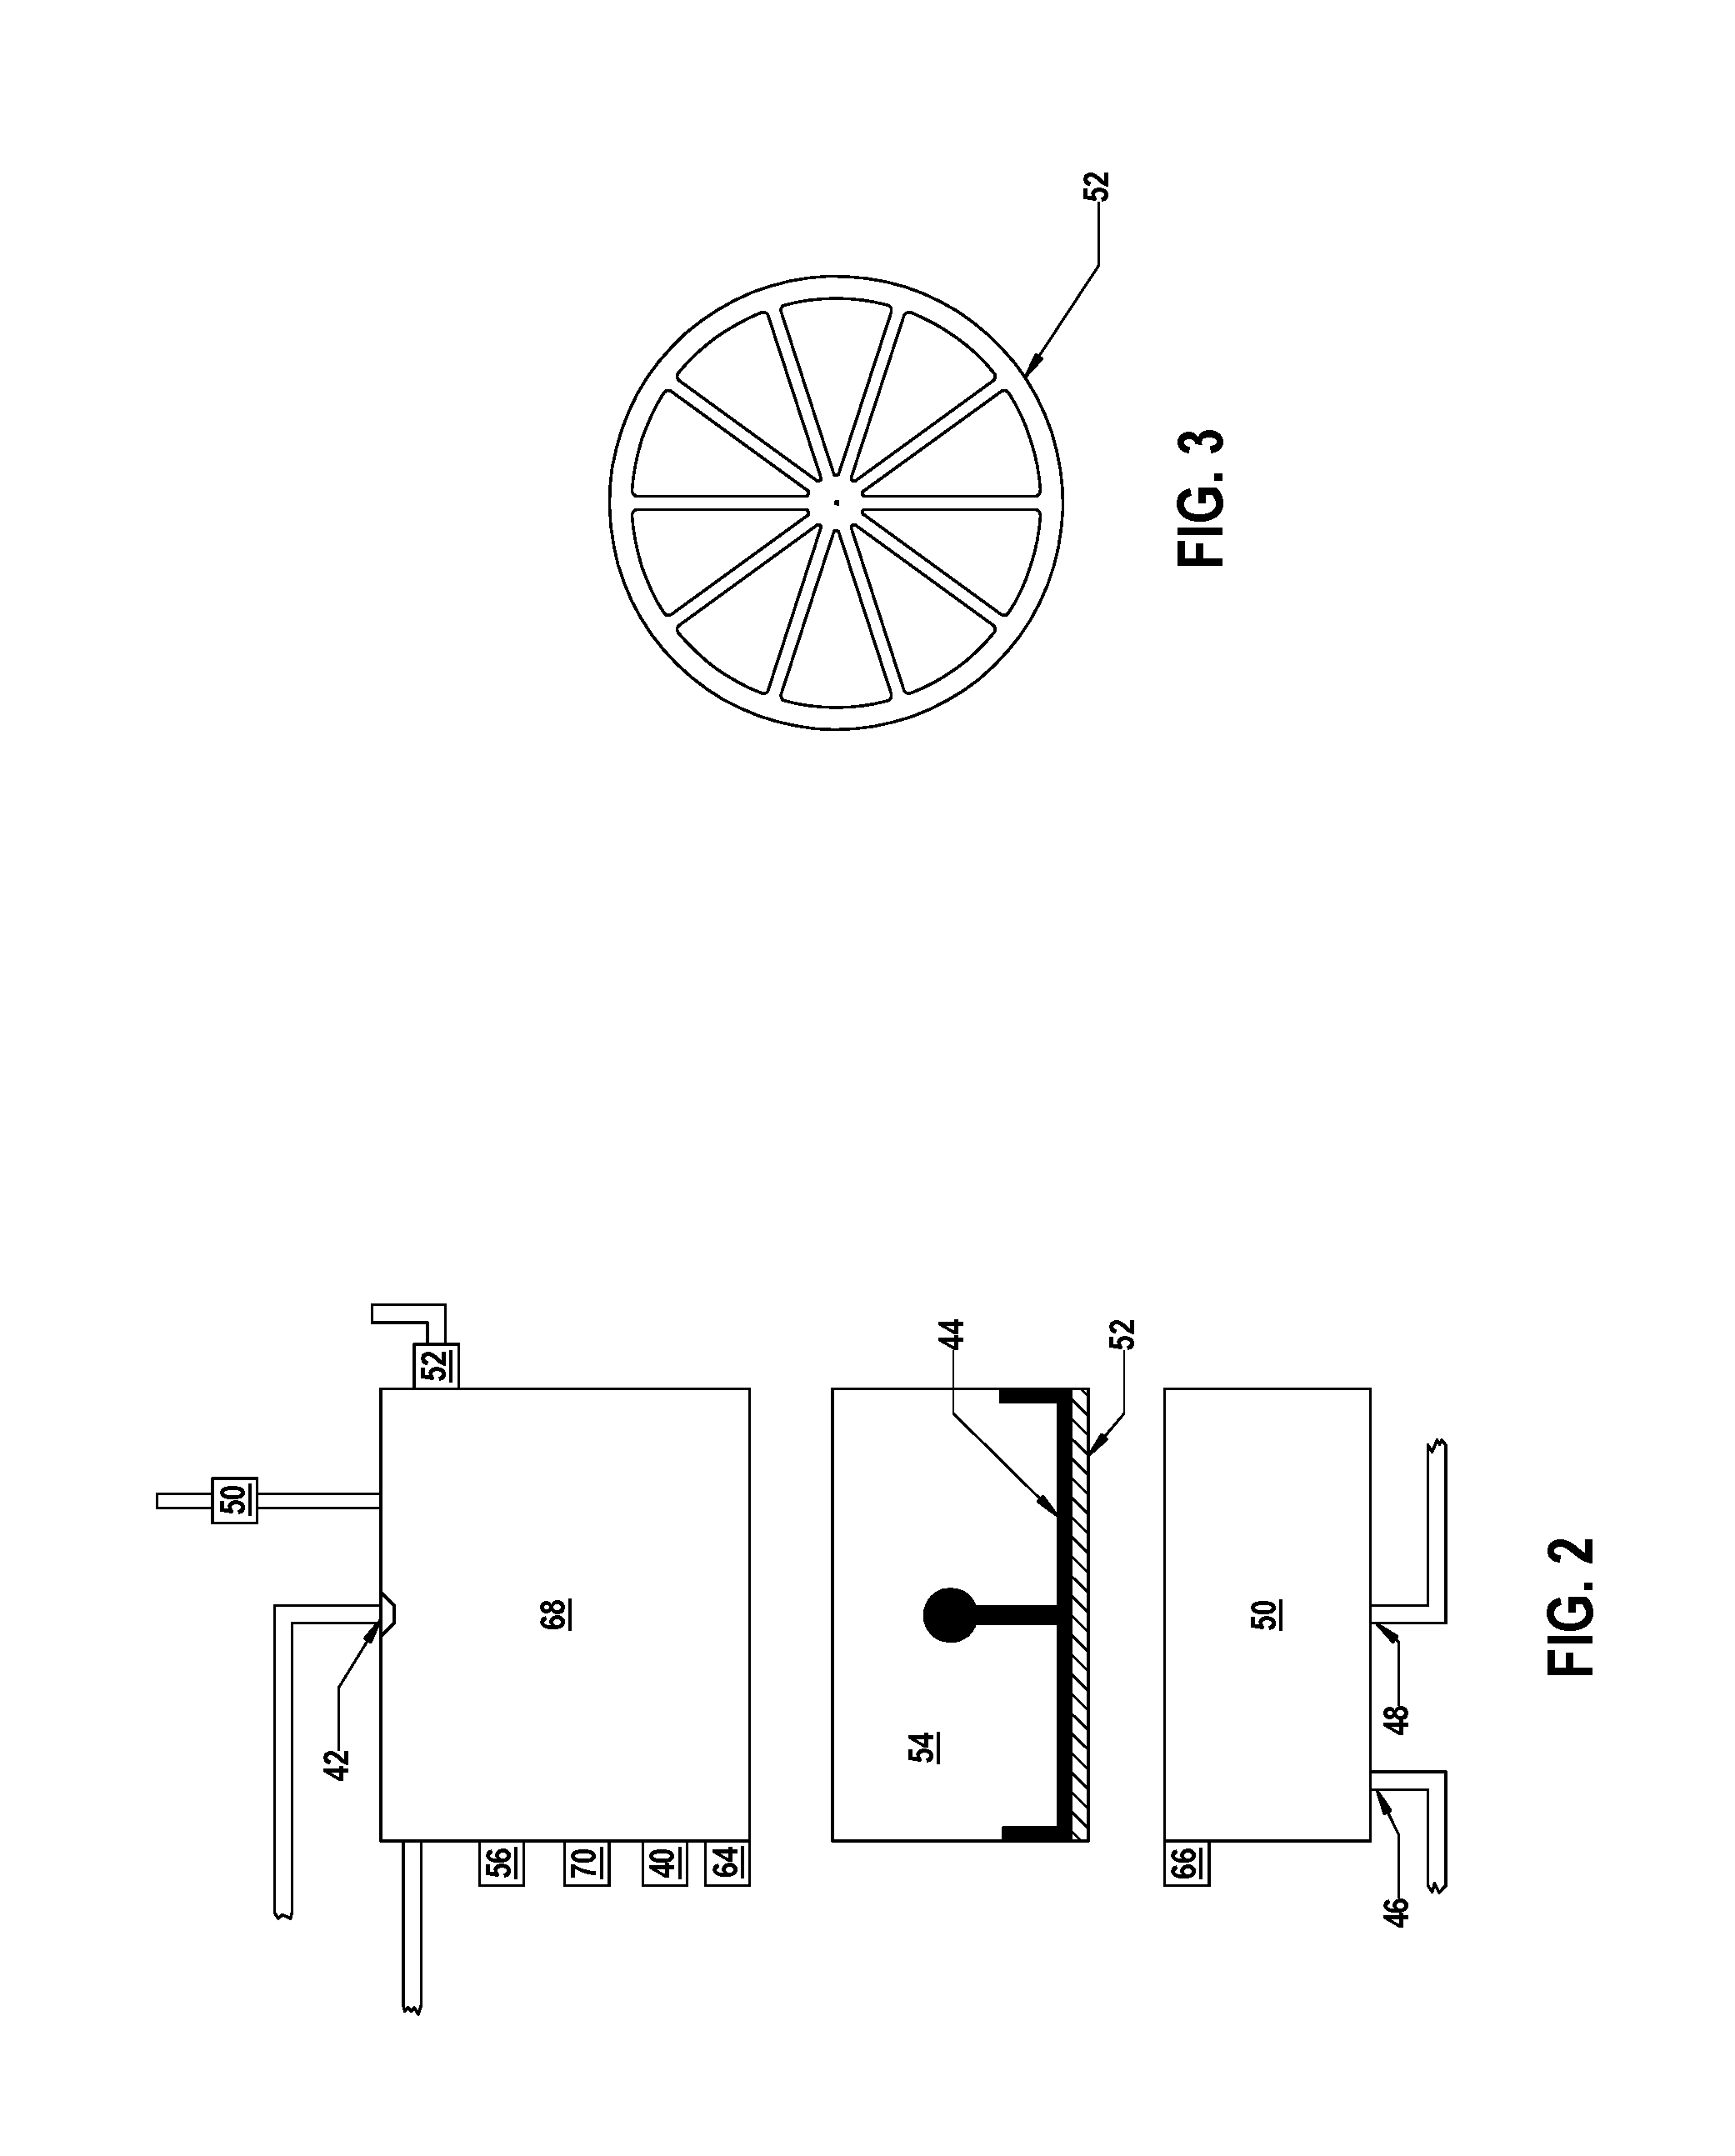 Beverage Brewing Apparatus and Related Method